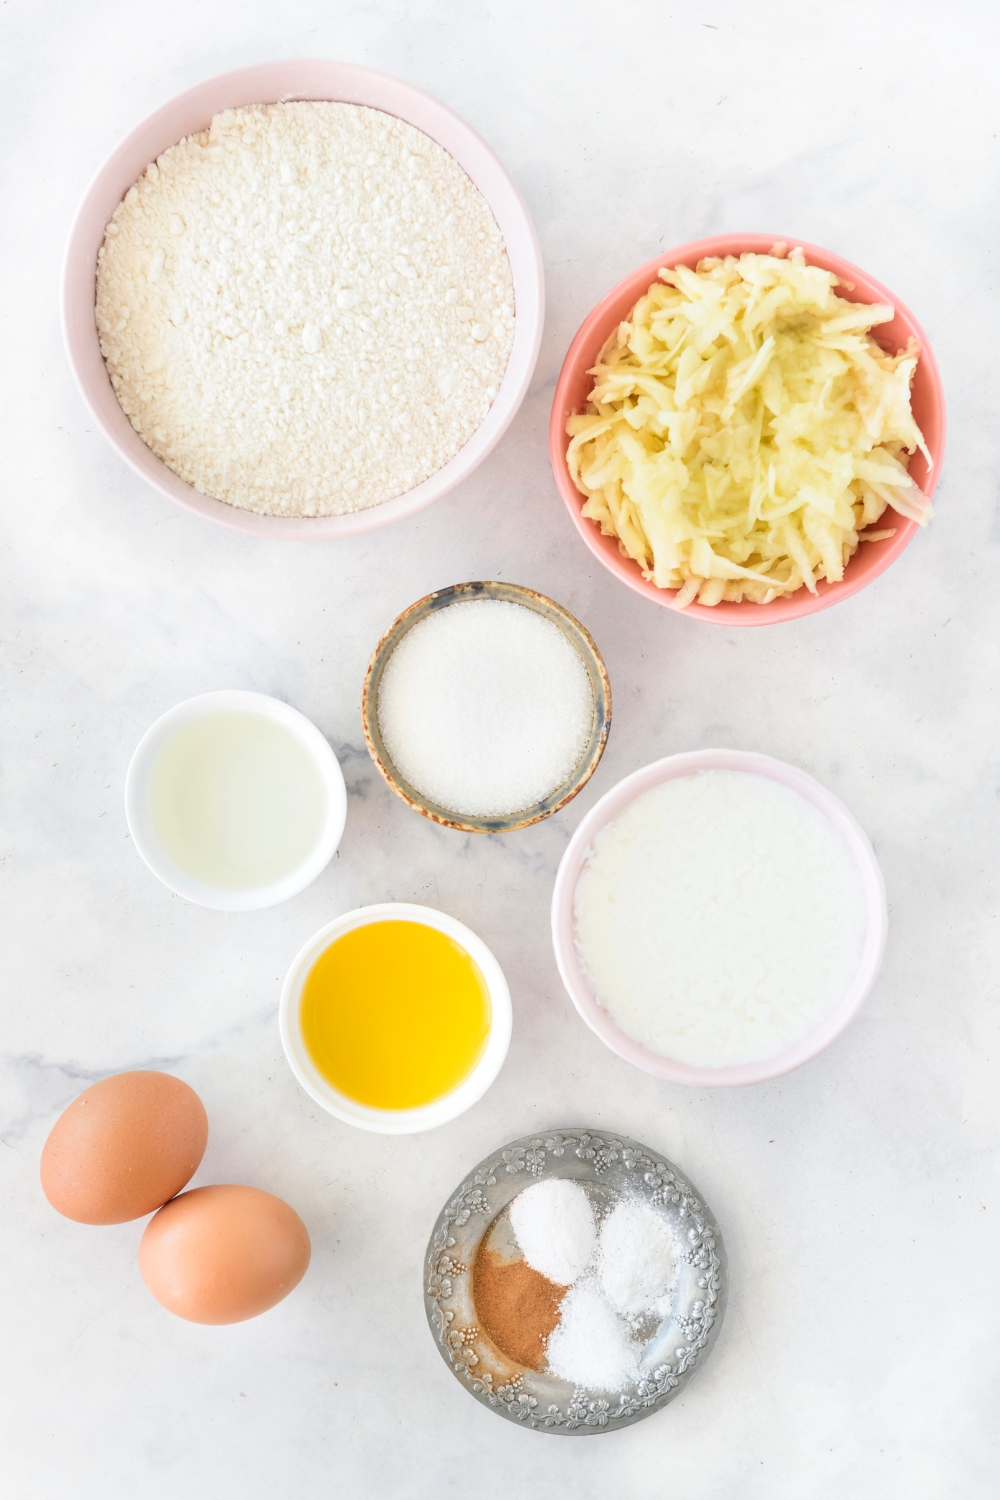 An assortment of ingredients including bowls of flour, grated apple, melted butter, sugar, spices, and two eggs on a white countertop.